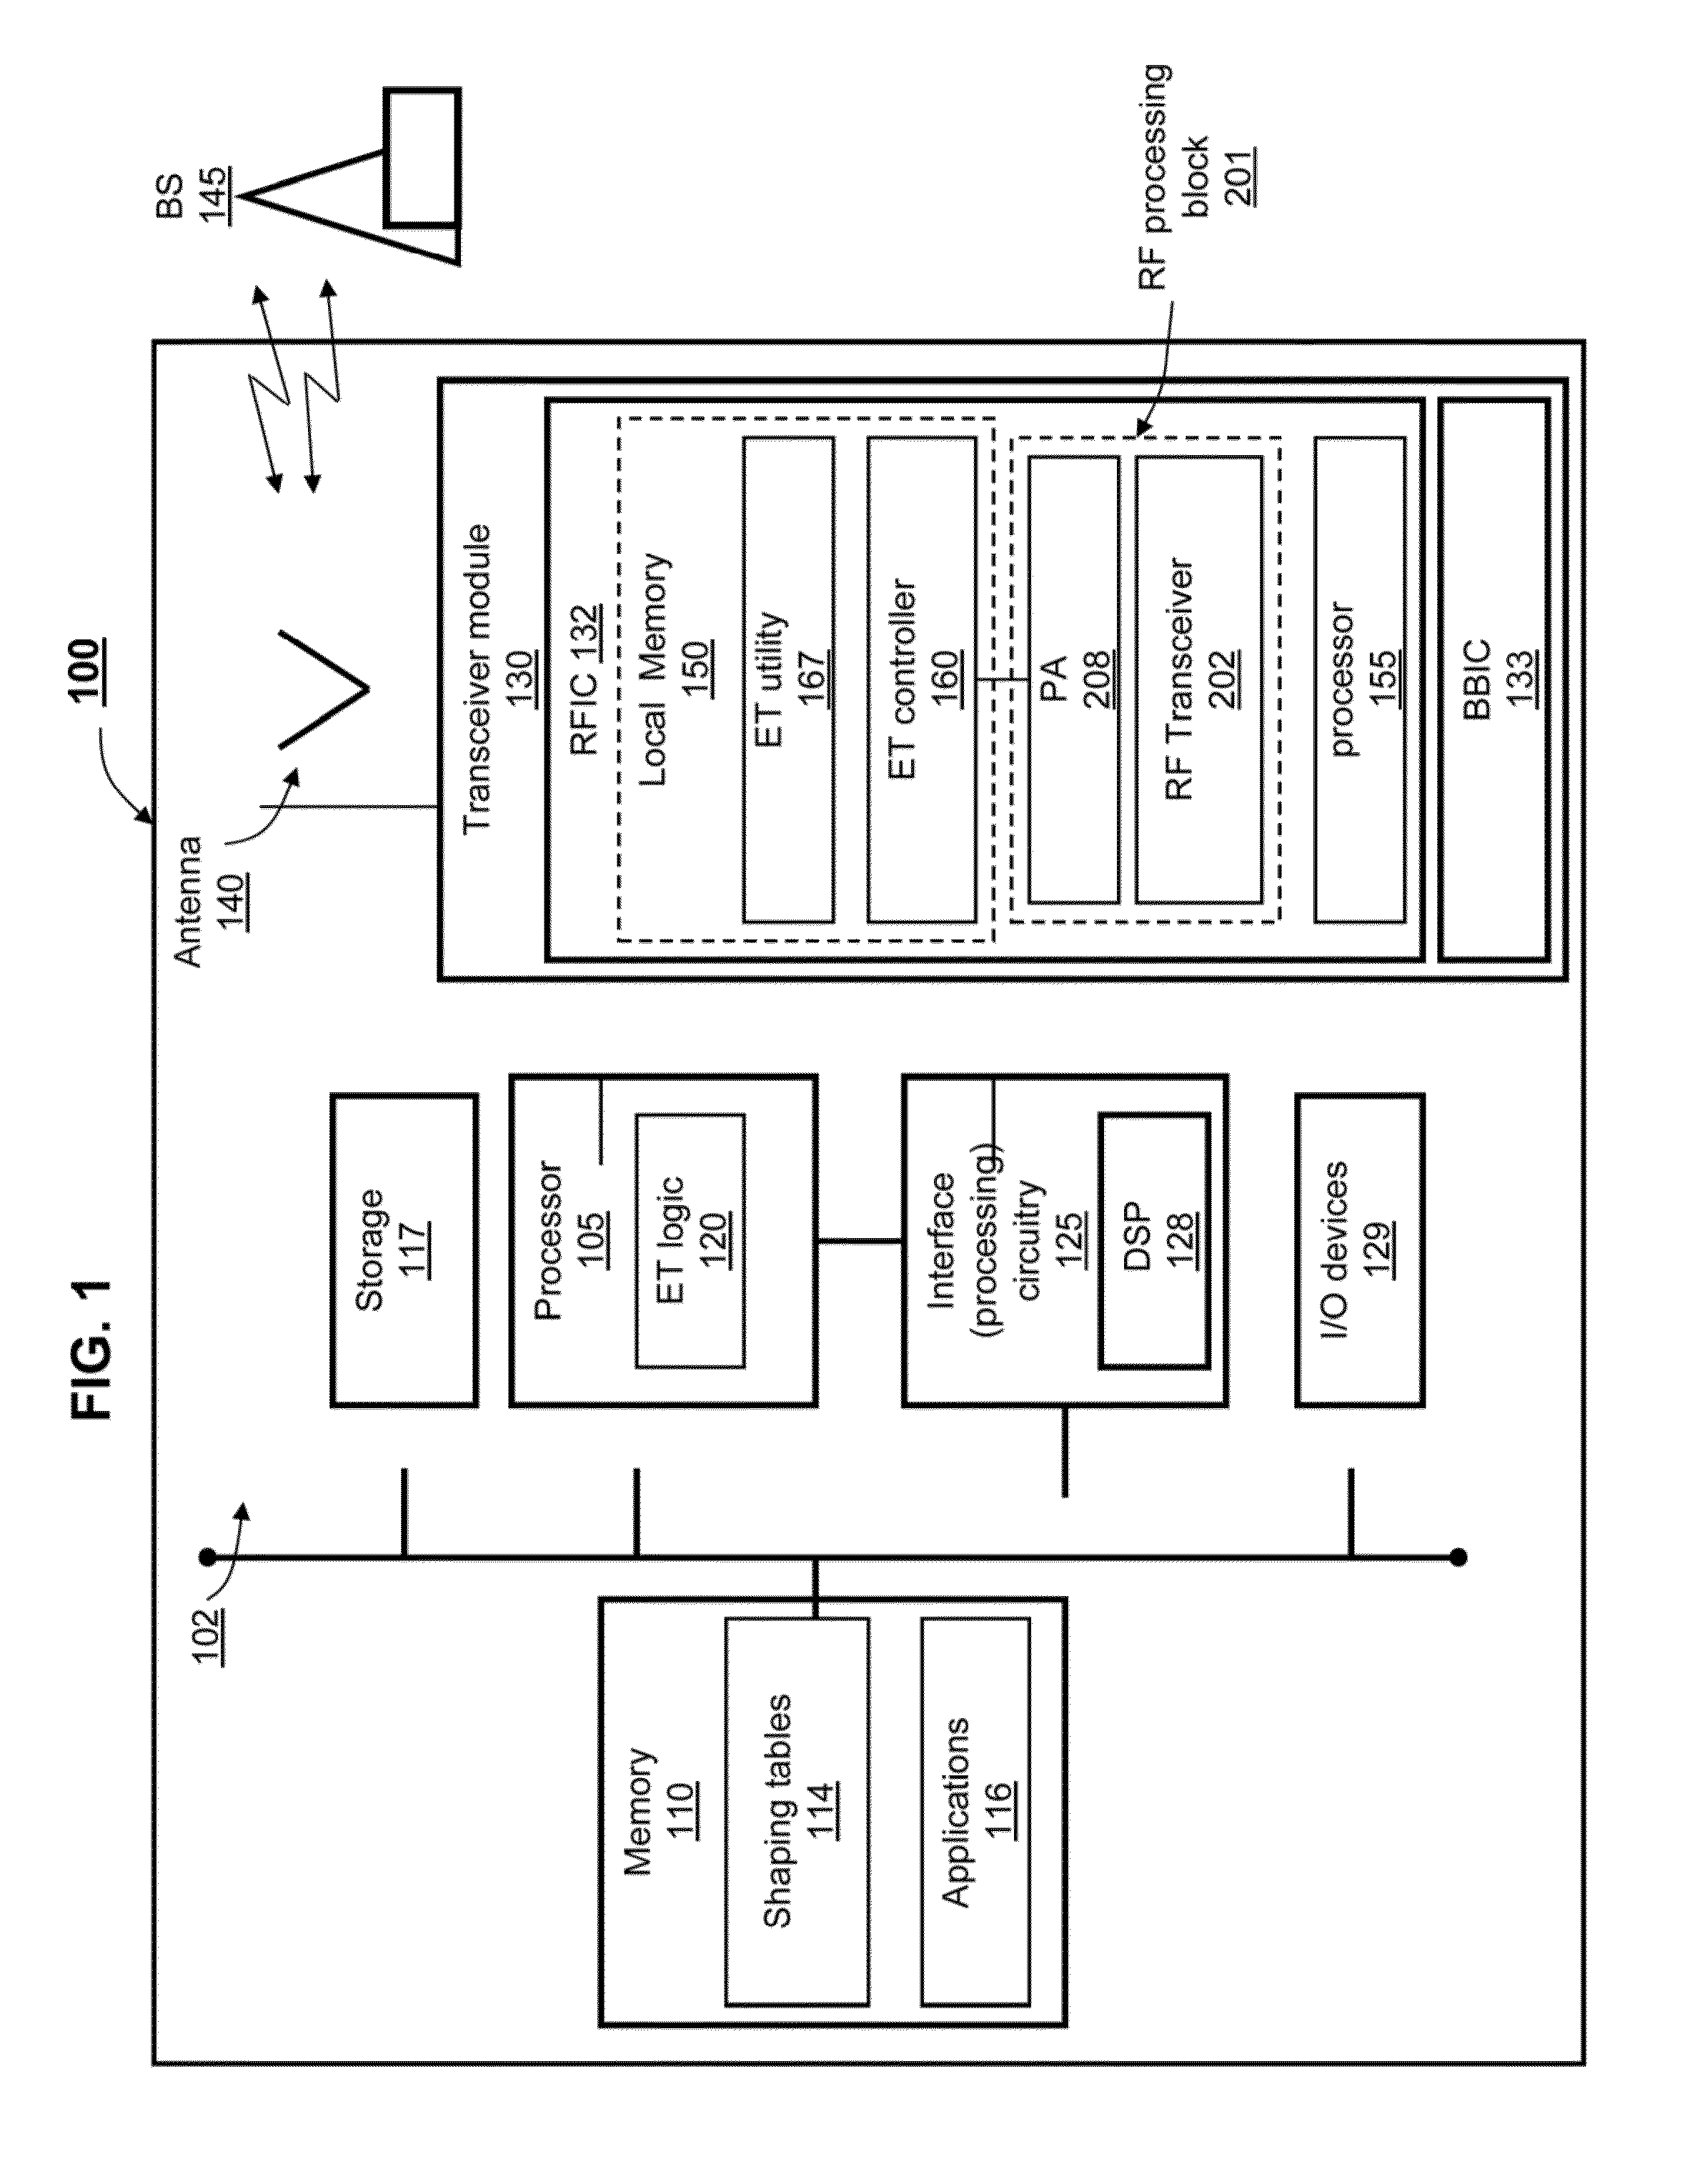 Method for improving tx gain in envelope tracking systems